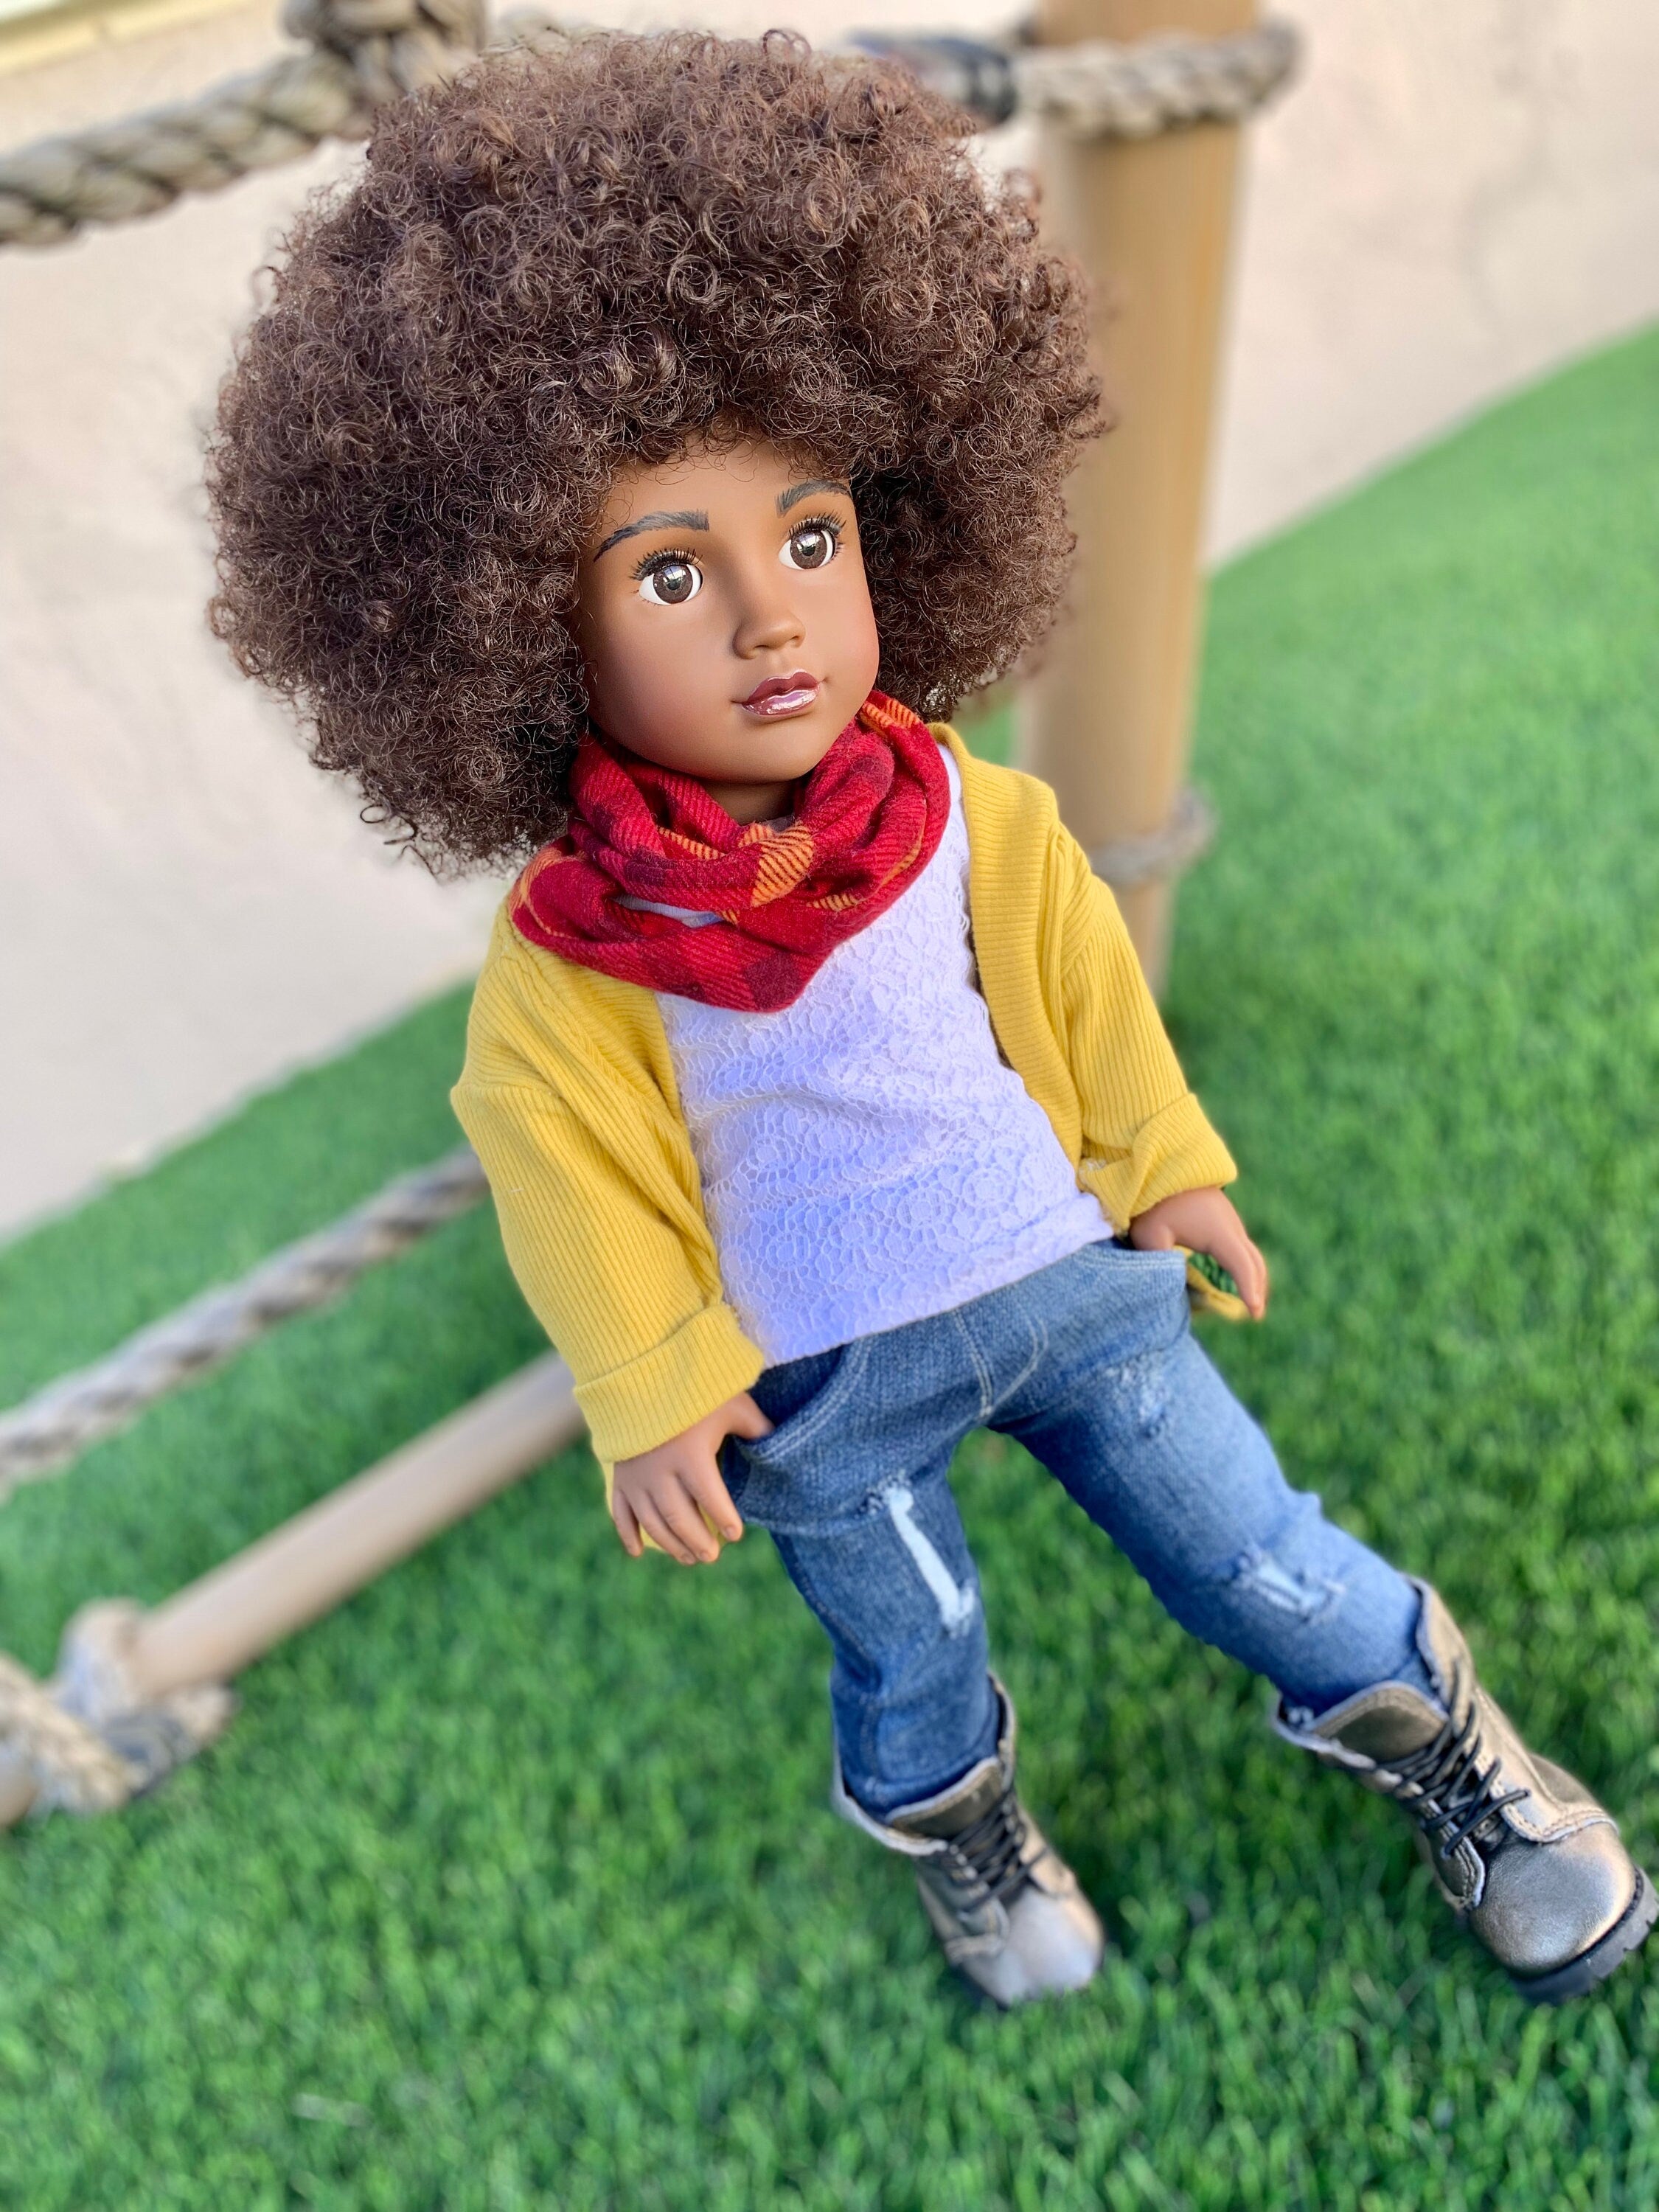 11" Custom Doll Wig Deluxe Heat safe fibers for 18" American Girl Dolls, My Life OG Journey Afro AA natural Wig !!!